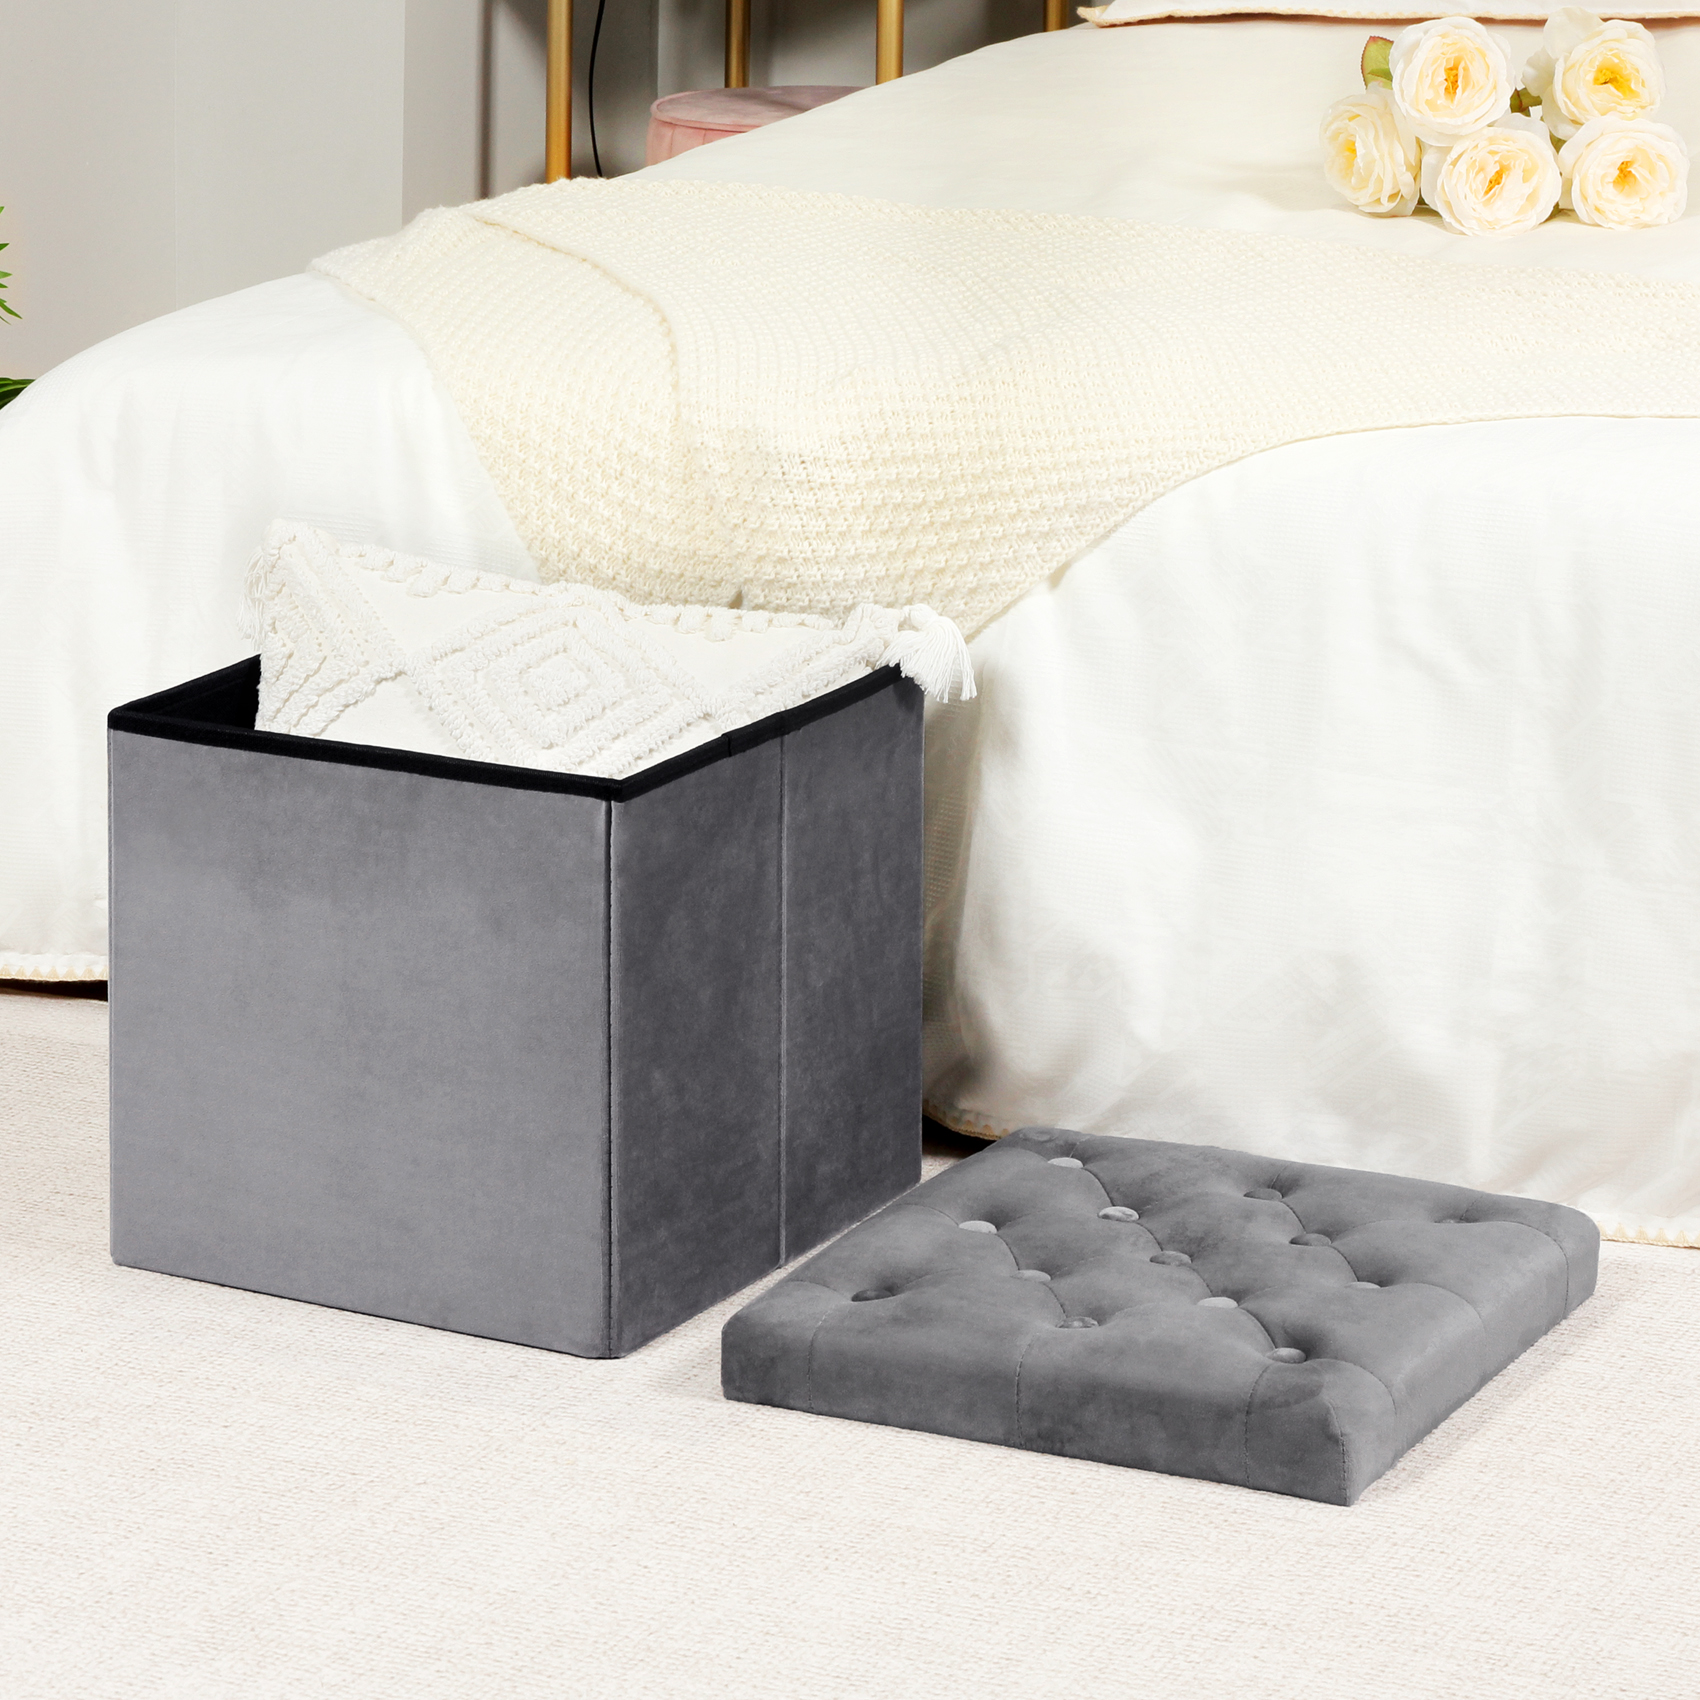 PINPLUS 15.7" Folding Grey Velvet Ottoman Storage Box, Footstool for Living Room,Foot Rest Seat with Lid - image 1 of 10